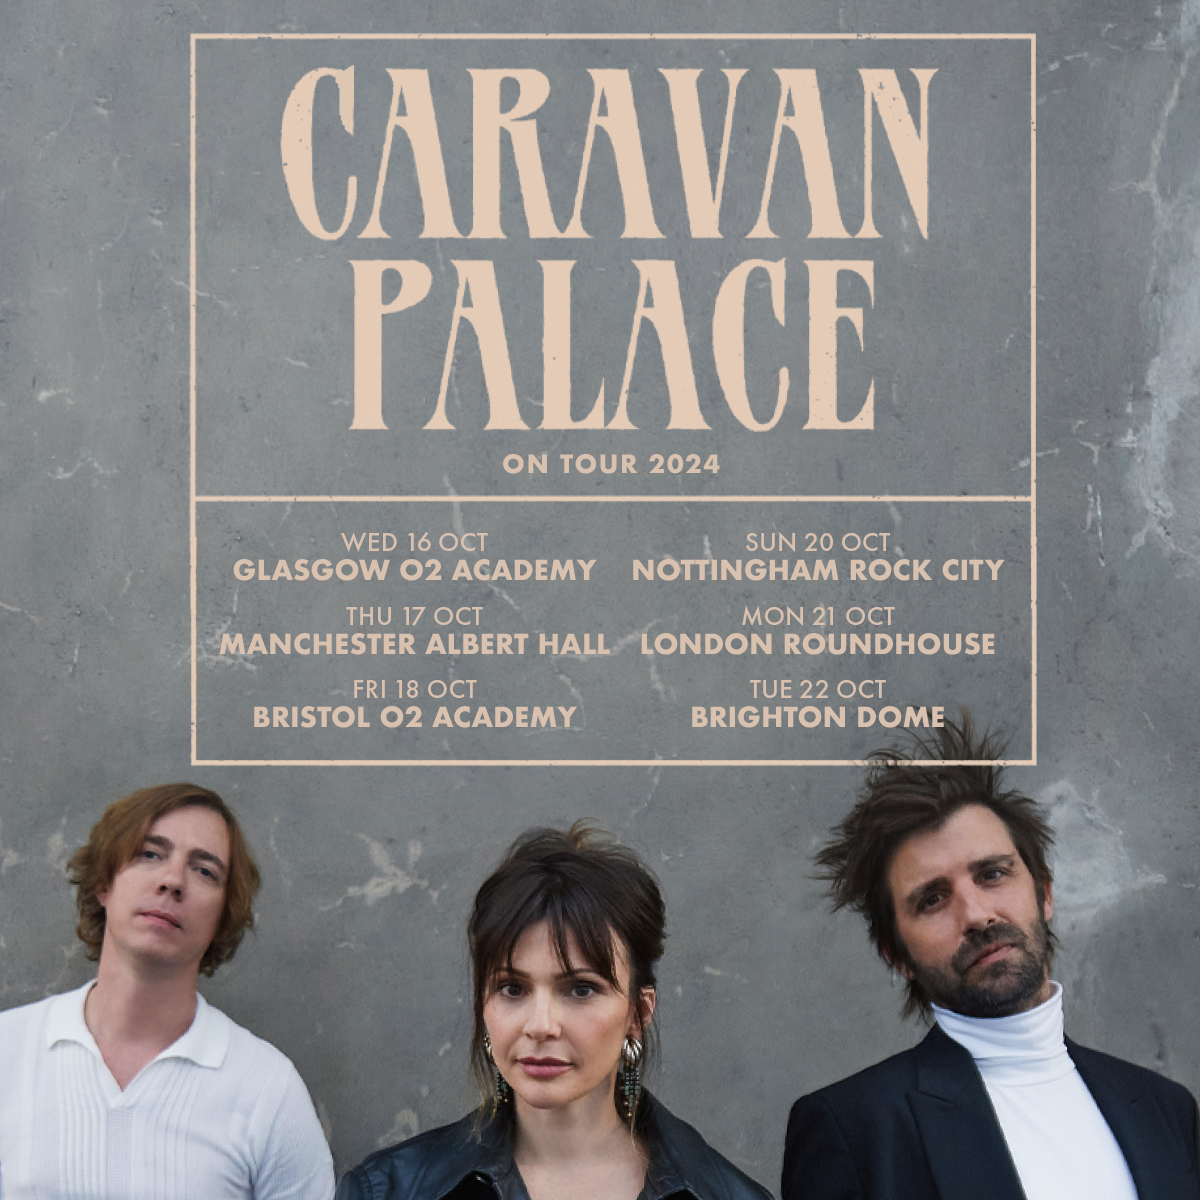 World renowned for its hybrid band-and-electronics set up, @caravanpalace are hitting the road in October! Tickets on sale now ⚡️ tix.to/CPAL